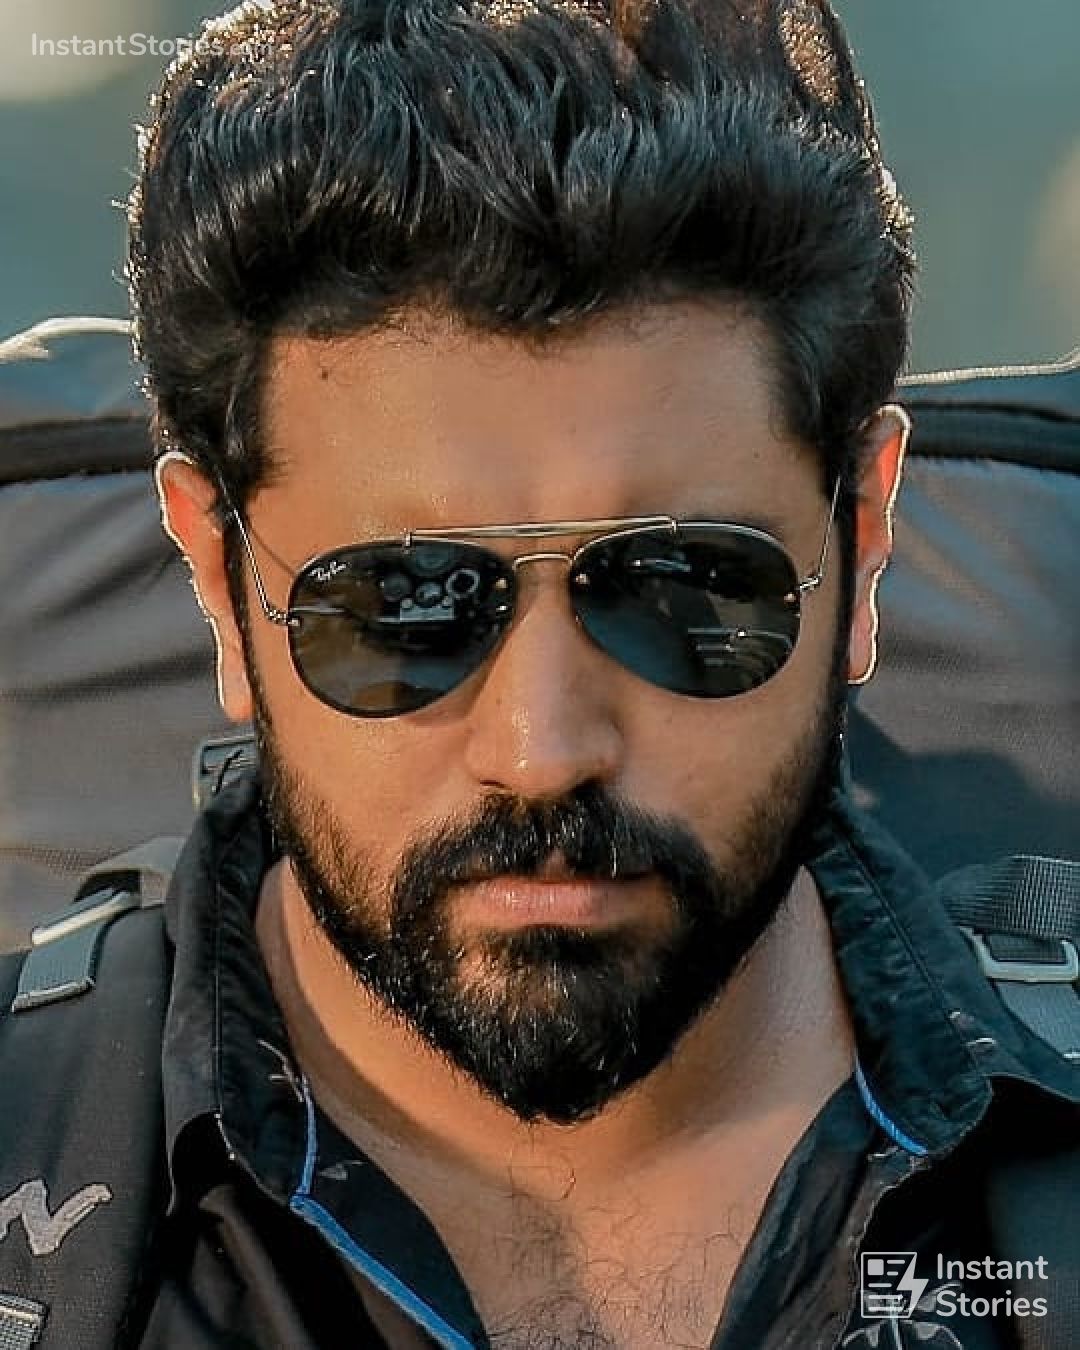 Nivin Pauly and Nayanthara starred Love Action Drama Movie HD Photos and posters (111) - Nivin Pauly, Love Action Drama (2019)